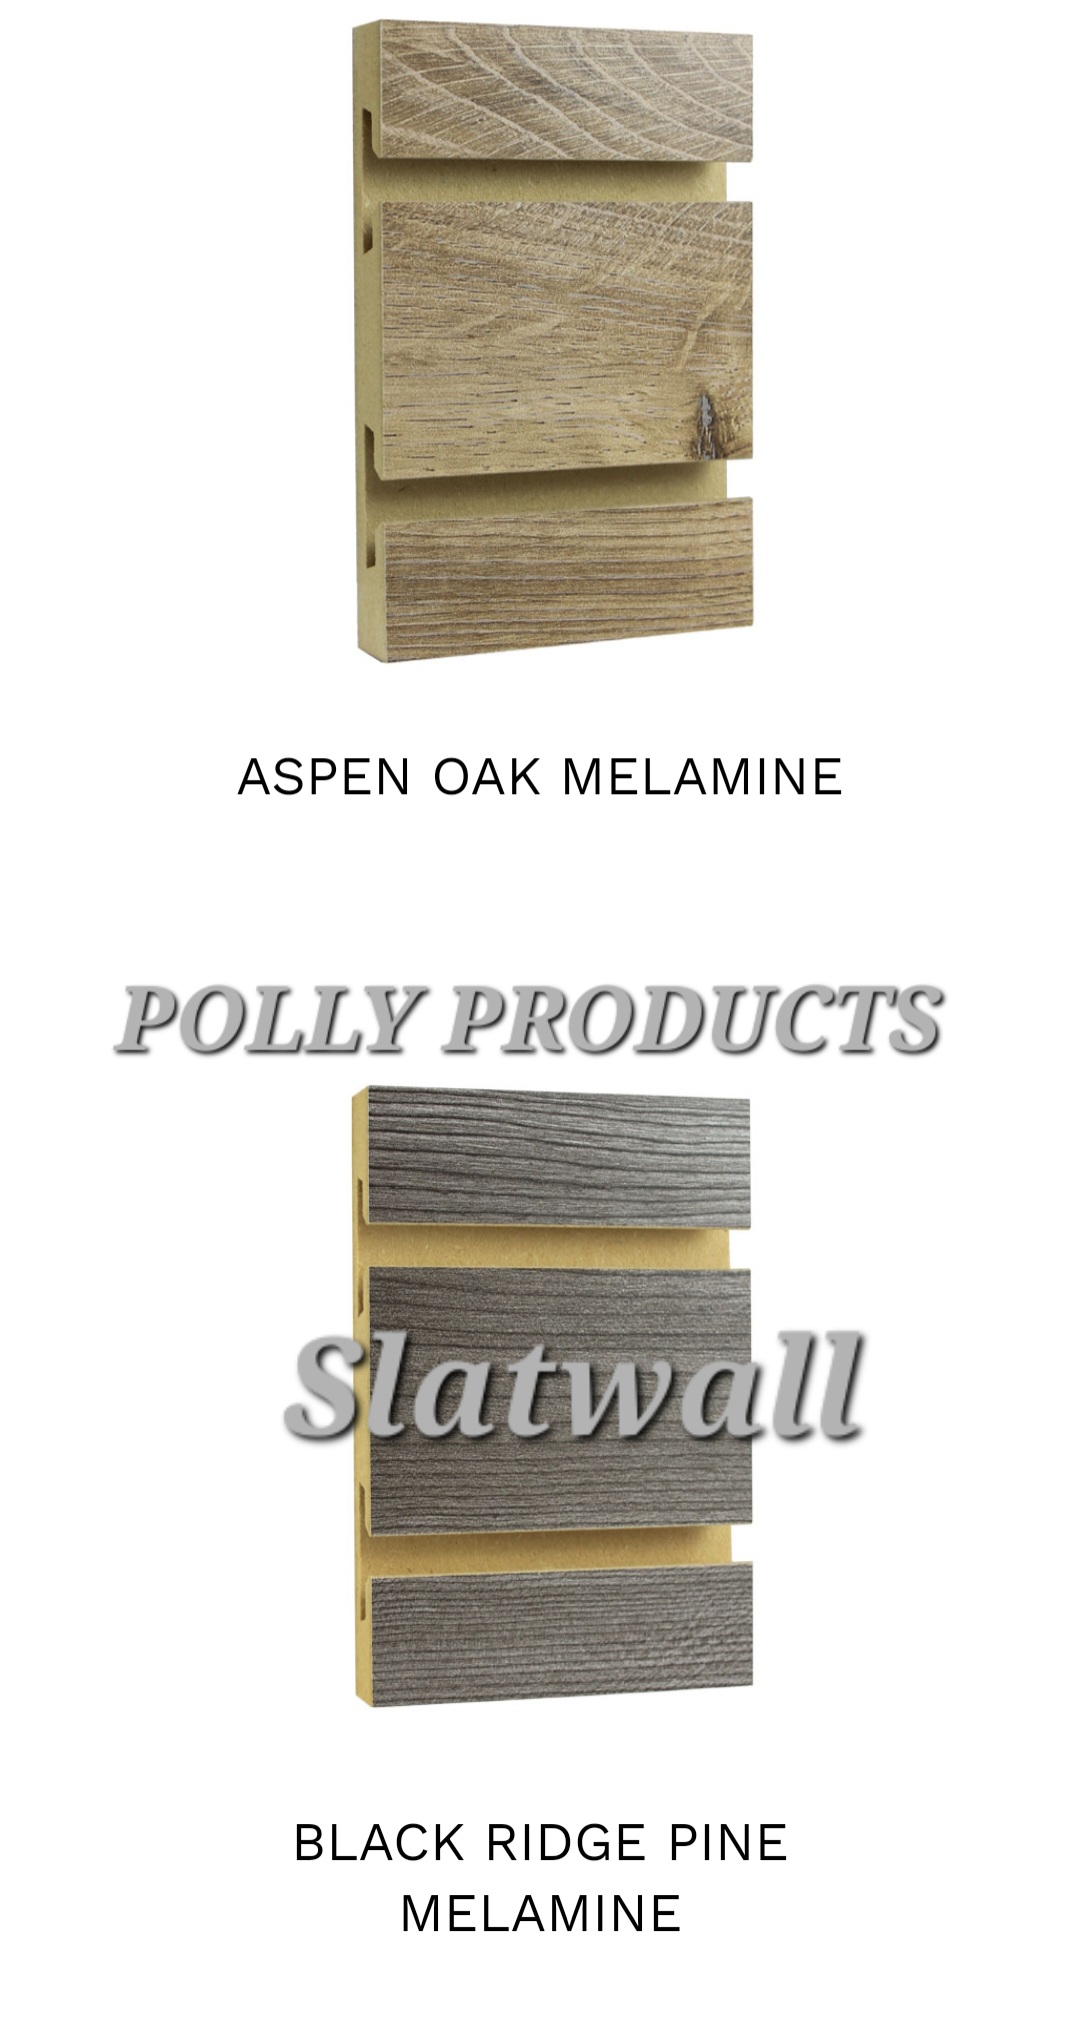 Pine and Oak Slatwall from PPC. MADE IN THE USA 🇺🇸 QUALITY.